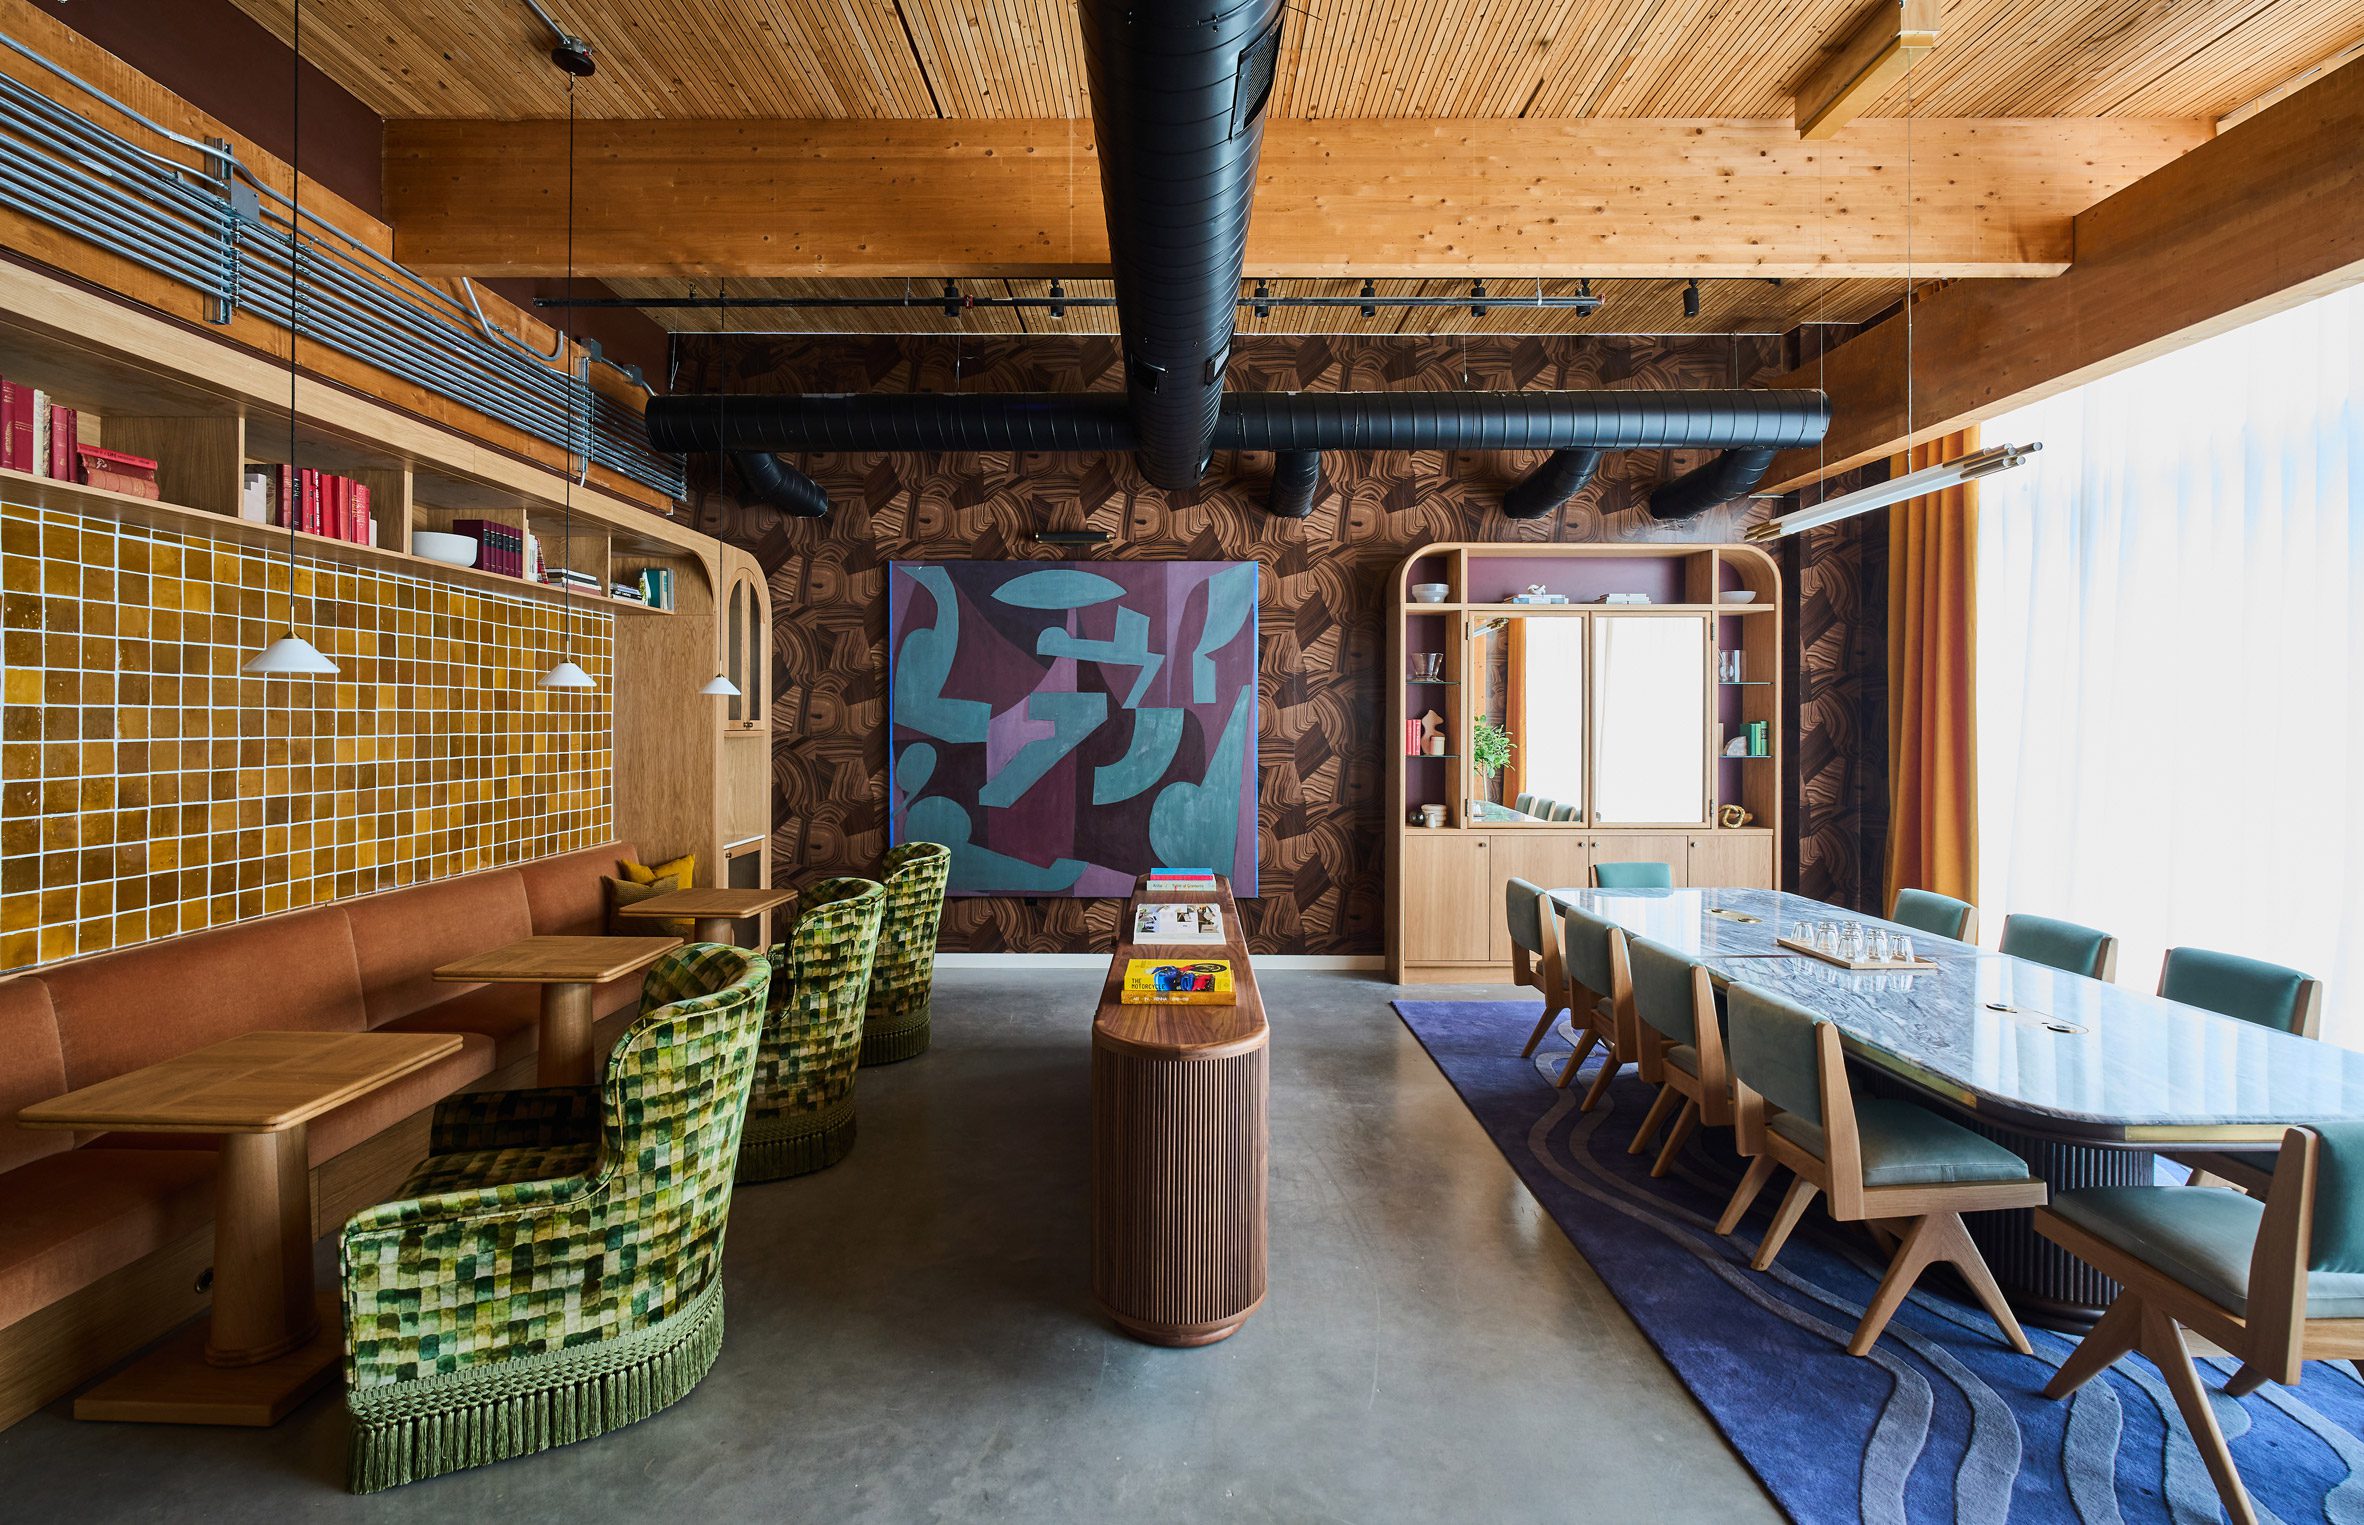 The Malin Nashville, USA, by The Malin design team with zellige tiles